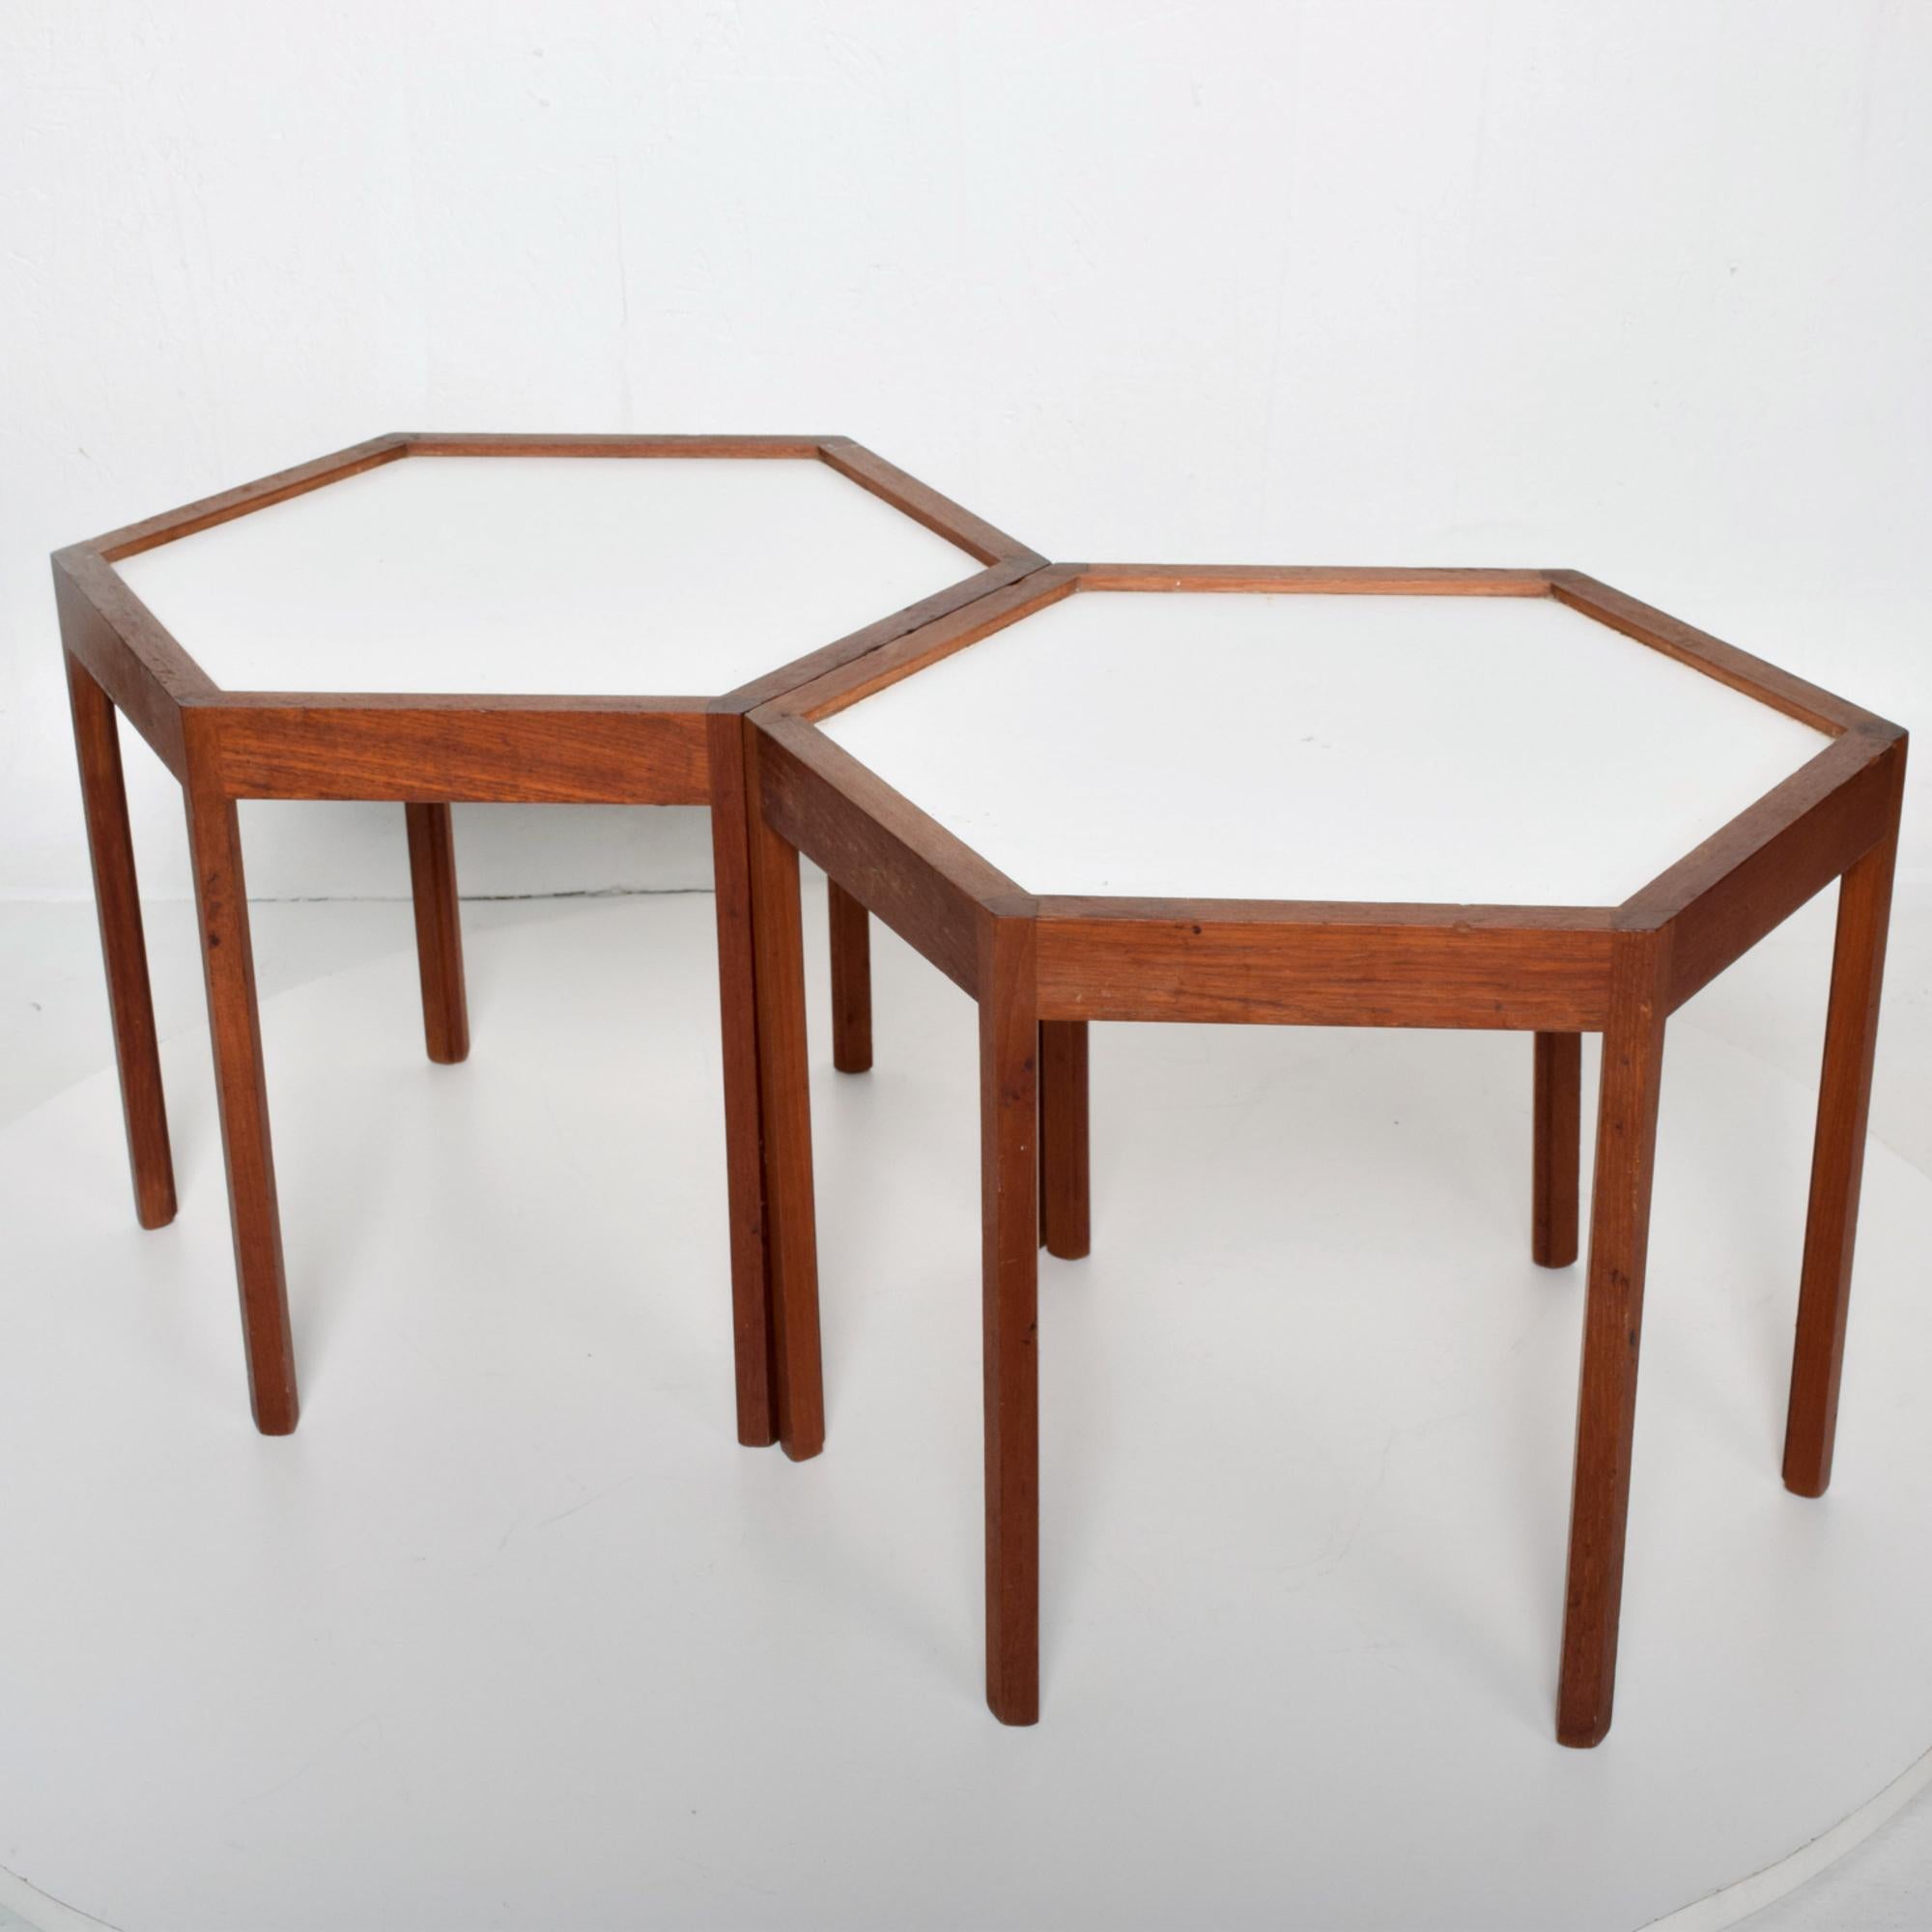 Hexagonal pair of side tables by Hans C Andersen. Made in Denmark circa 1960s. 
Hexagon shape with solid teak wood and white laminate Formica table top.
Dimensions: 14.5 height x 19 in diameter.
Overall good condition. Recently oiled. Expect